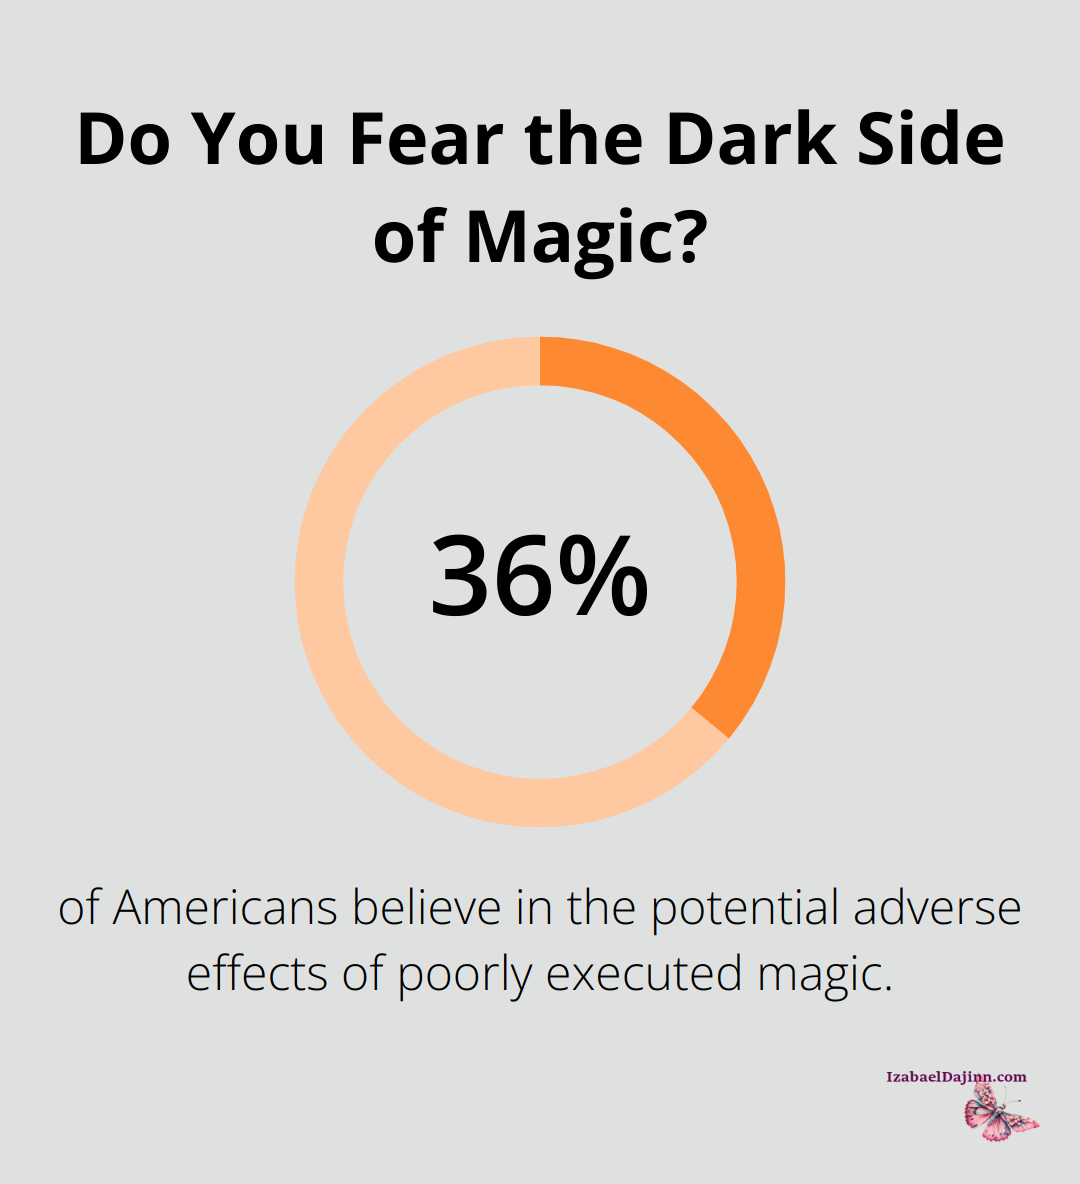 Do You Fear the Dark Side of Magic?